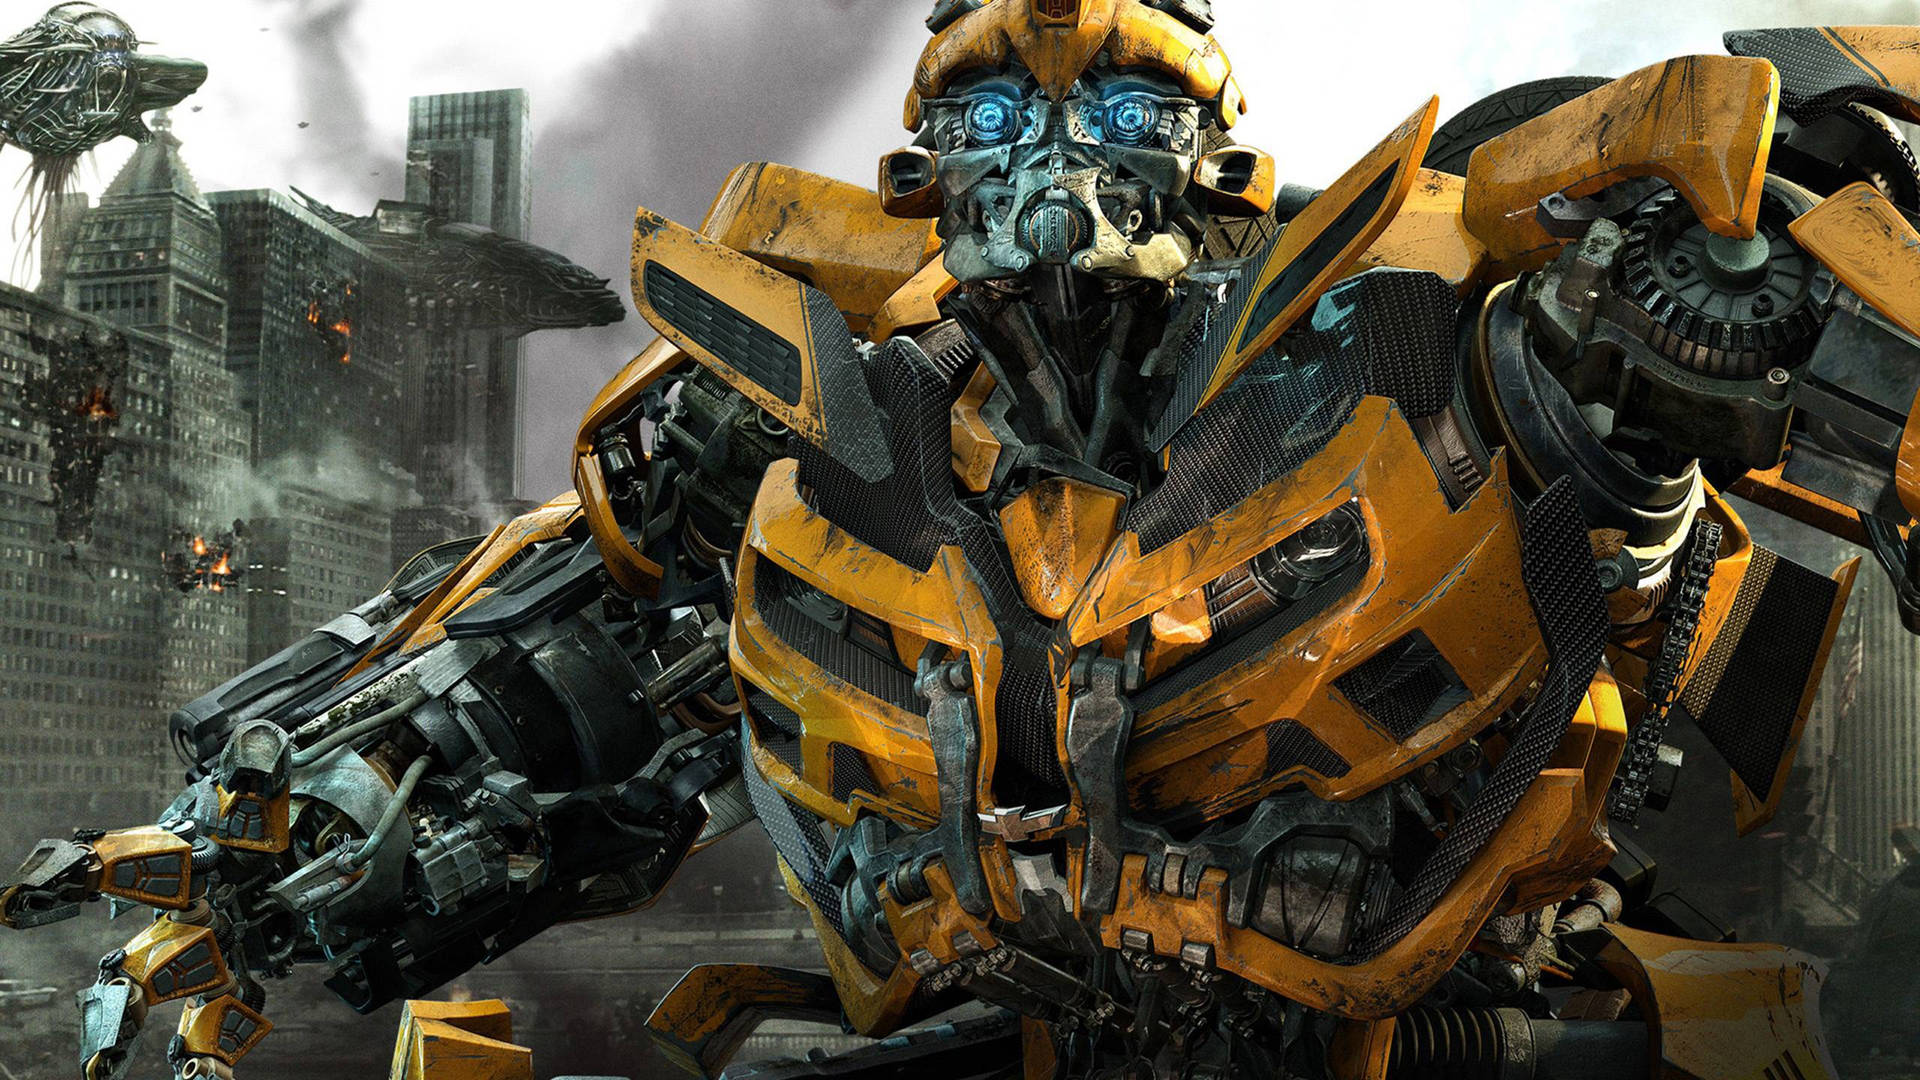 Transformers 2560X1440 Wallpaper and Background Image